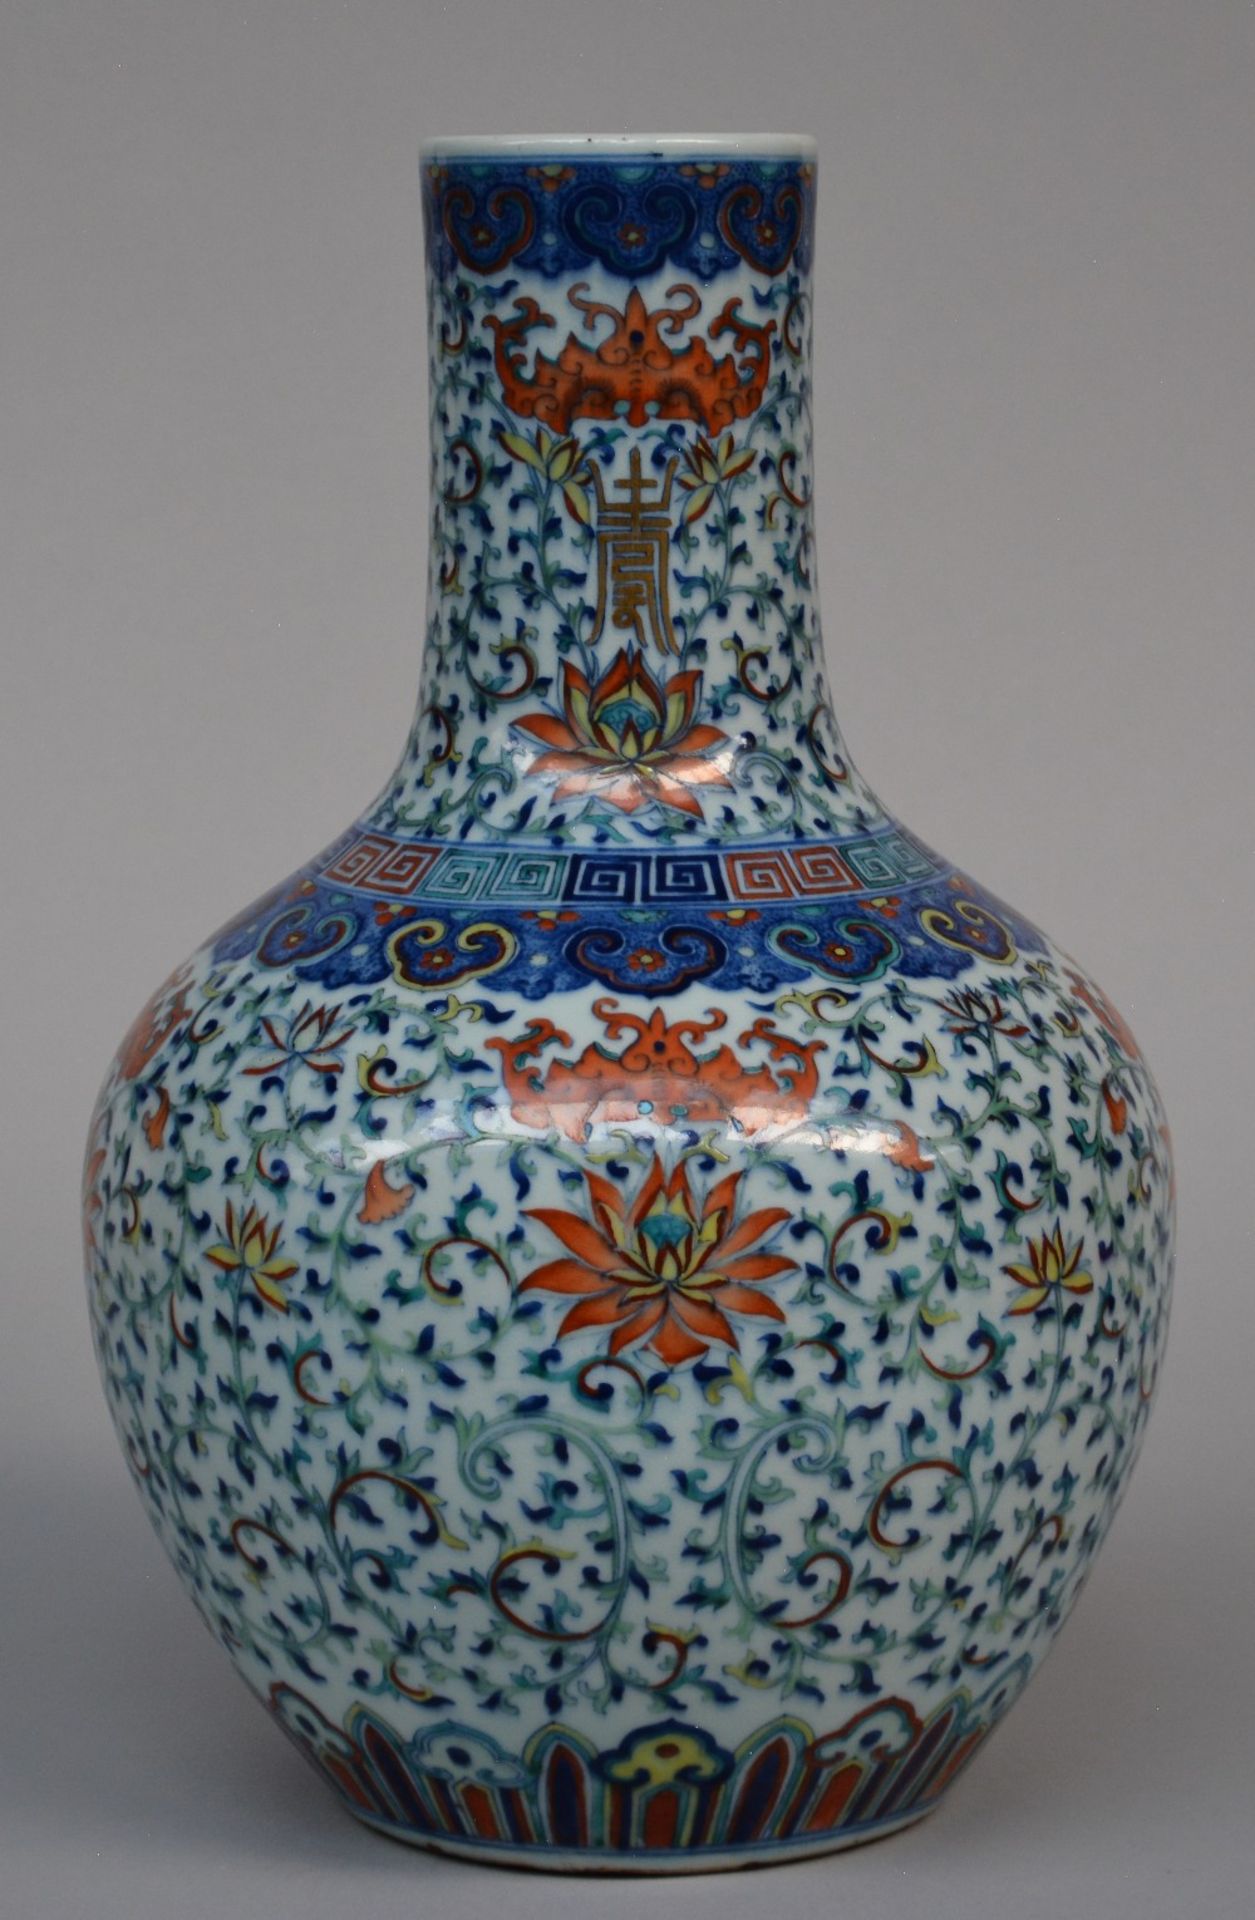 A fine Chinese 'Tianqiuping' vase with doucai enamels: four iron-red lotus flowers, surrounded by